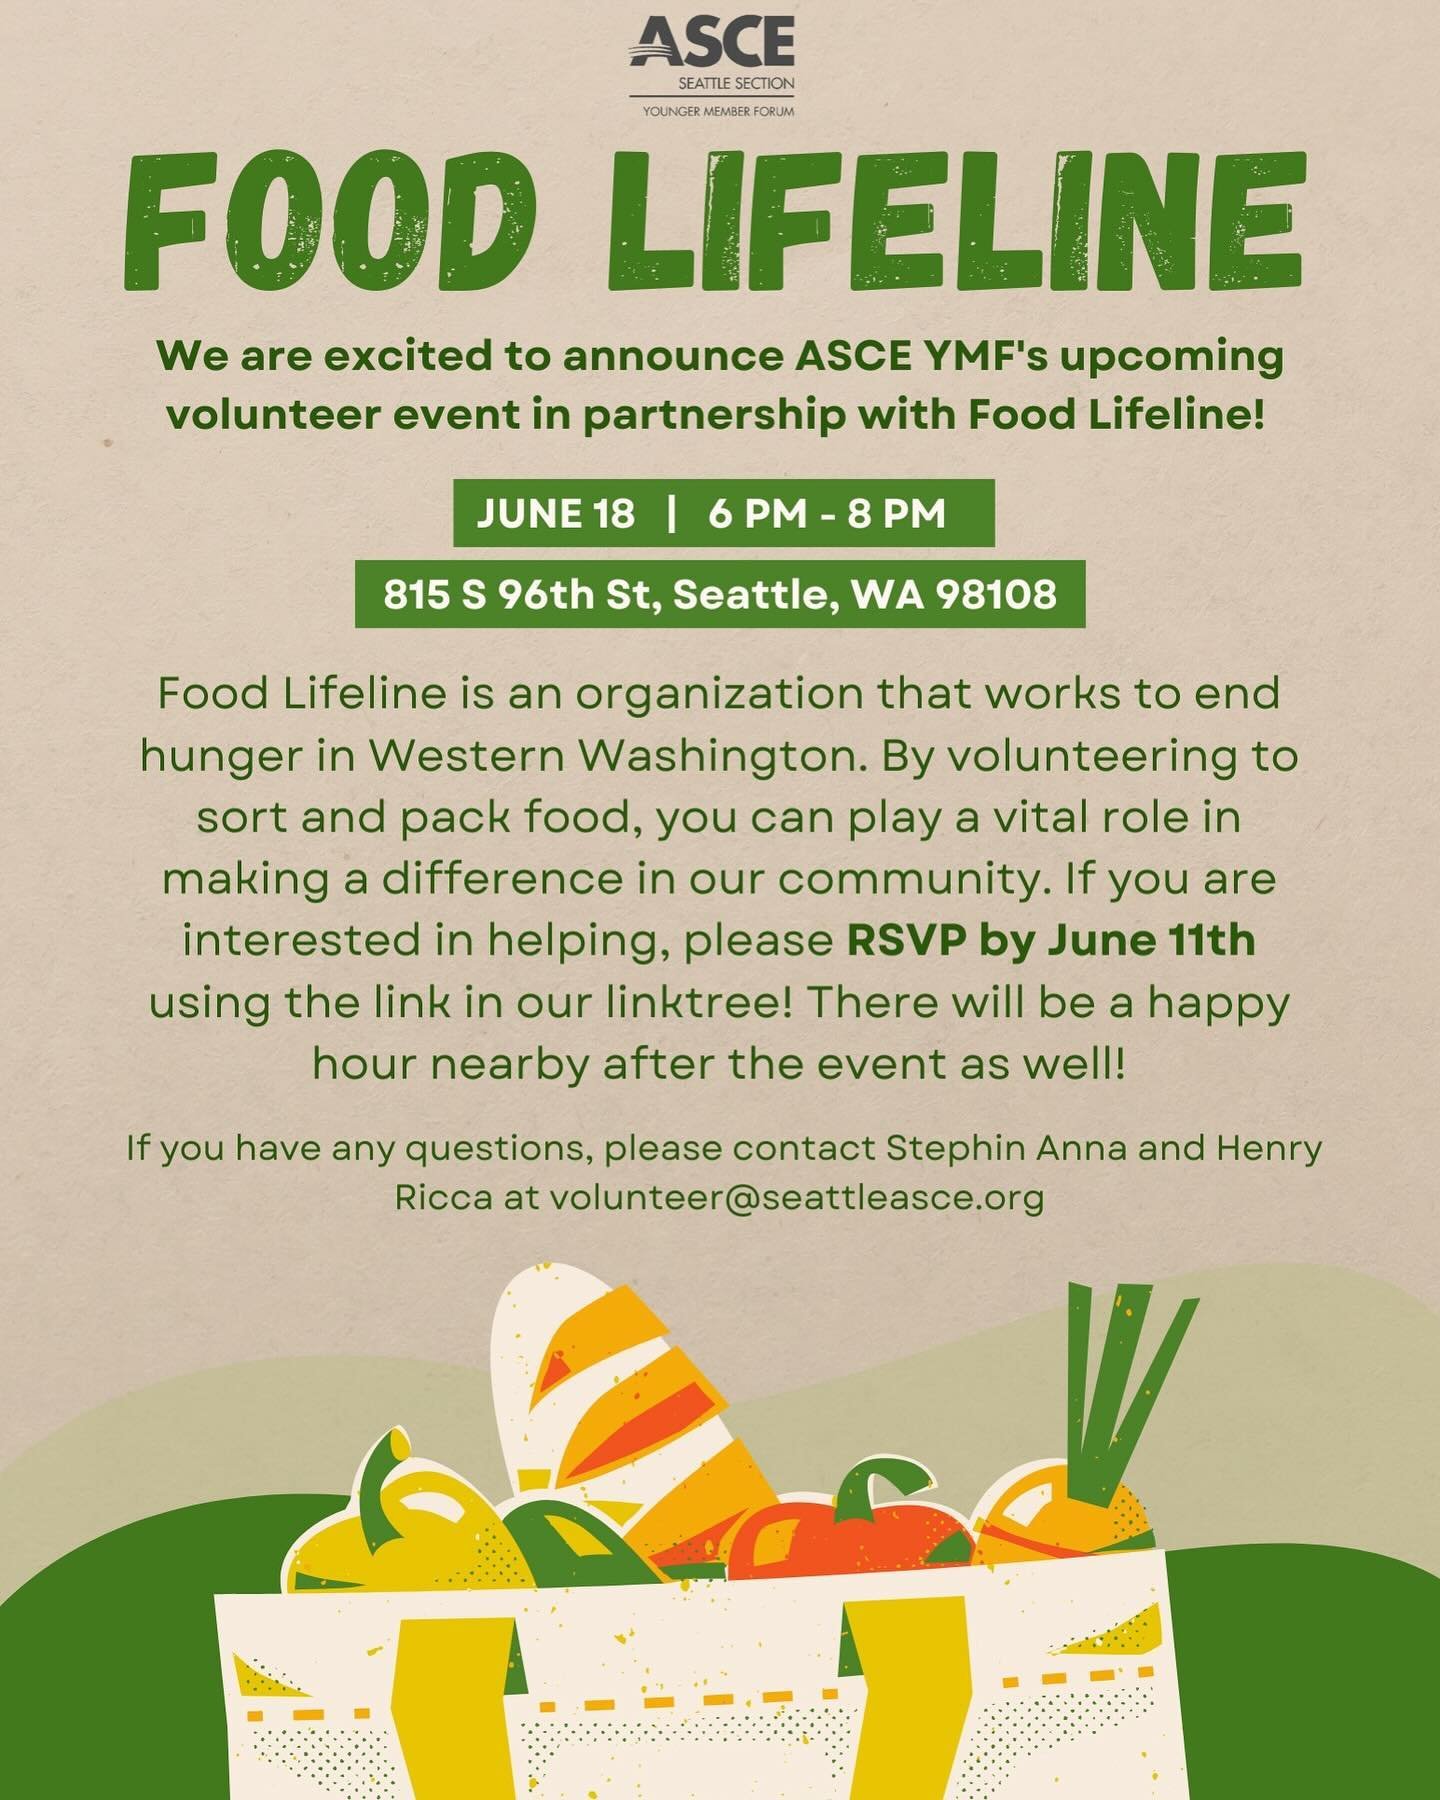 Join us at our next volunteer event with Food Lifeline!! RSVP by June 11th using the link in our bio!